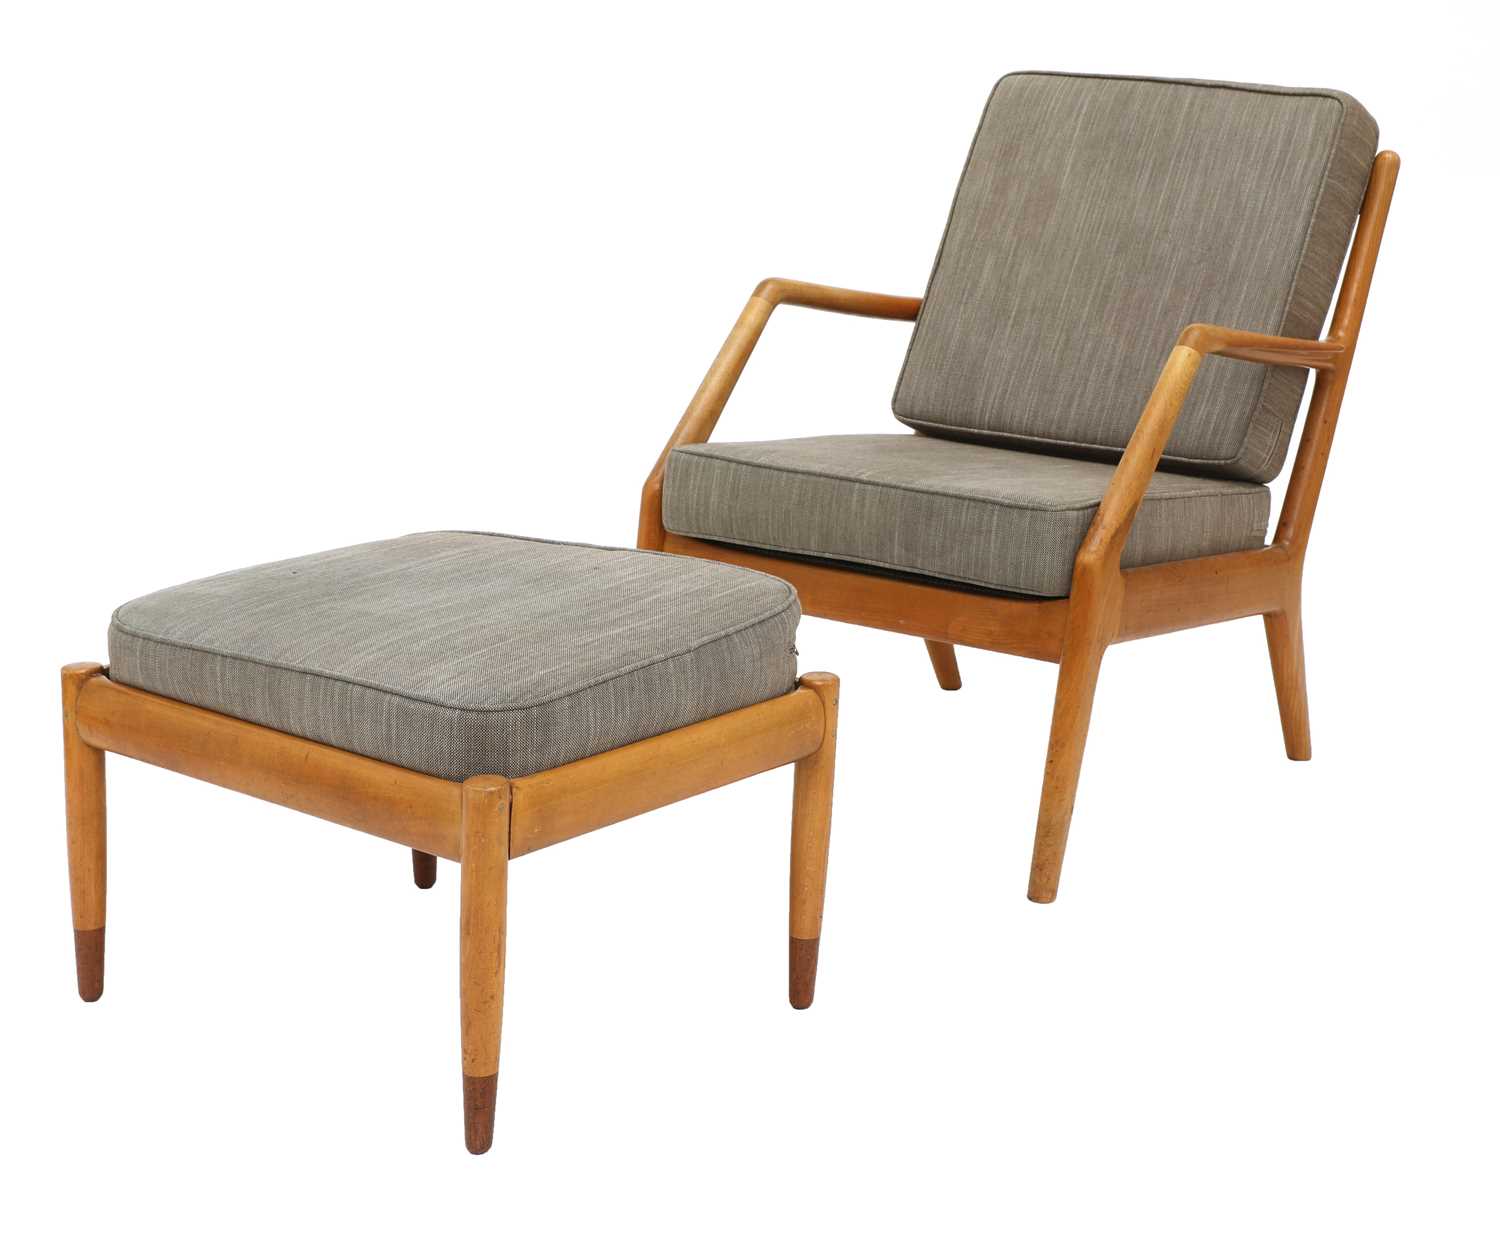 Lot 588 - A Danish birch and teak lounger and stool